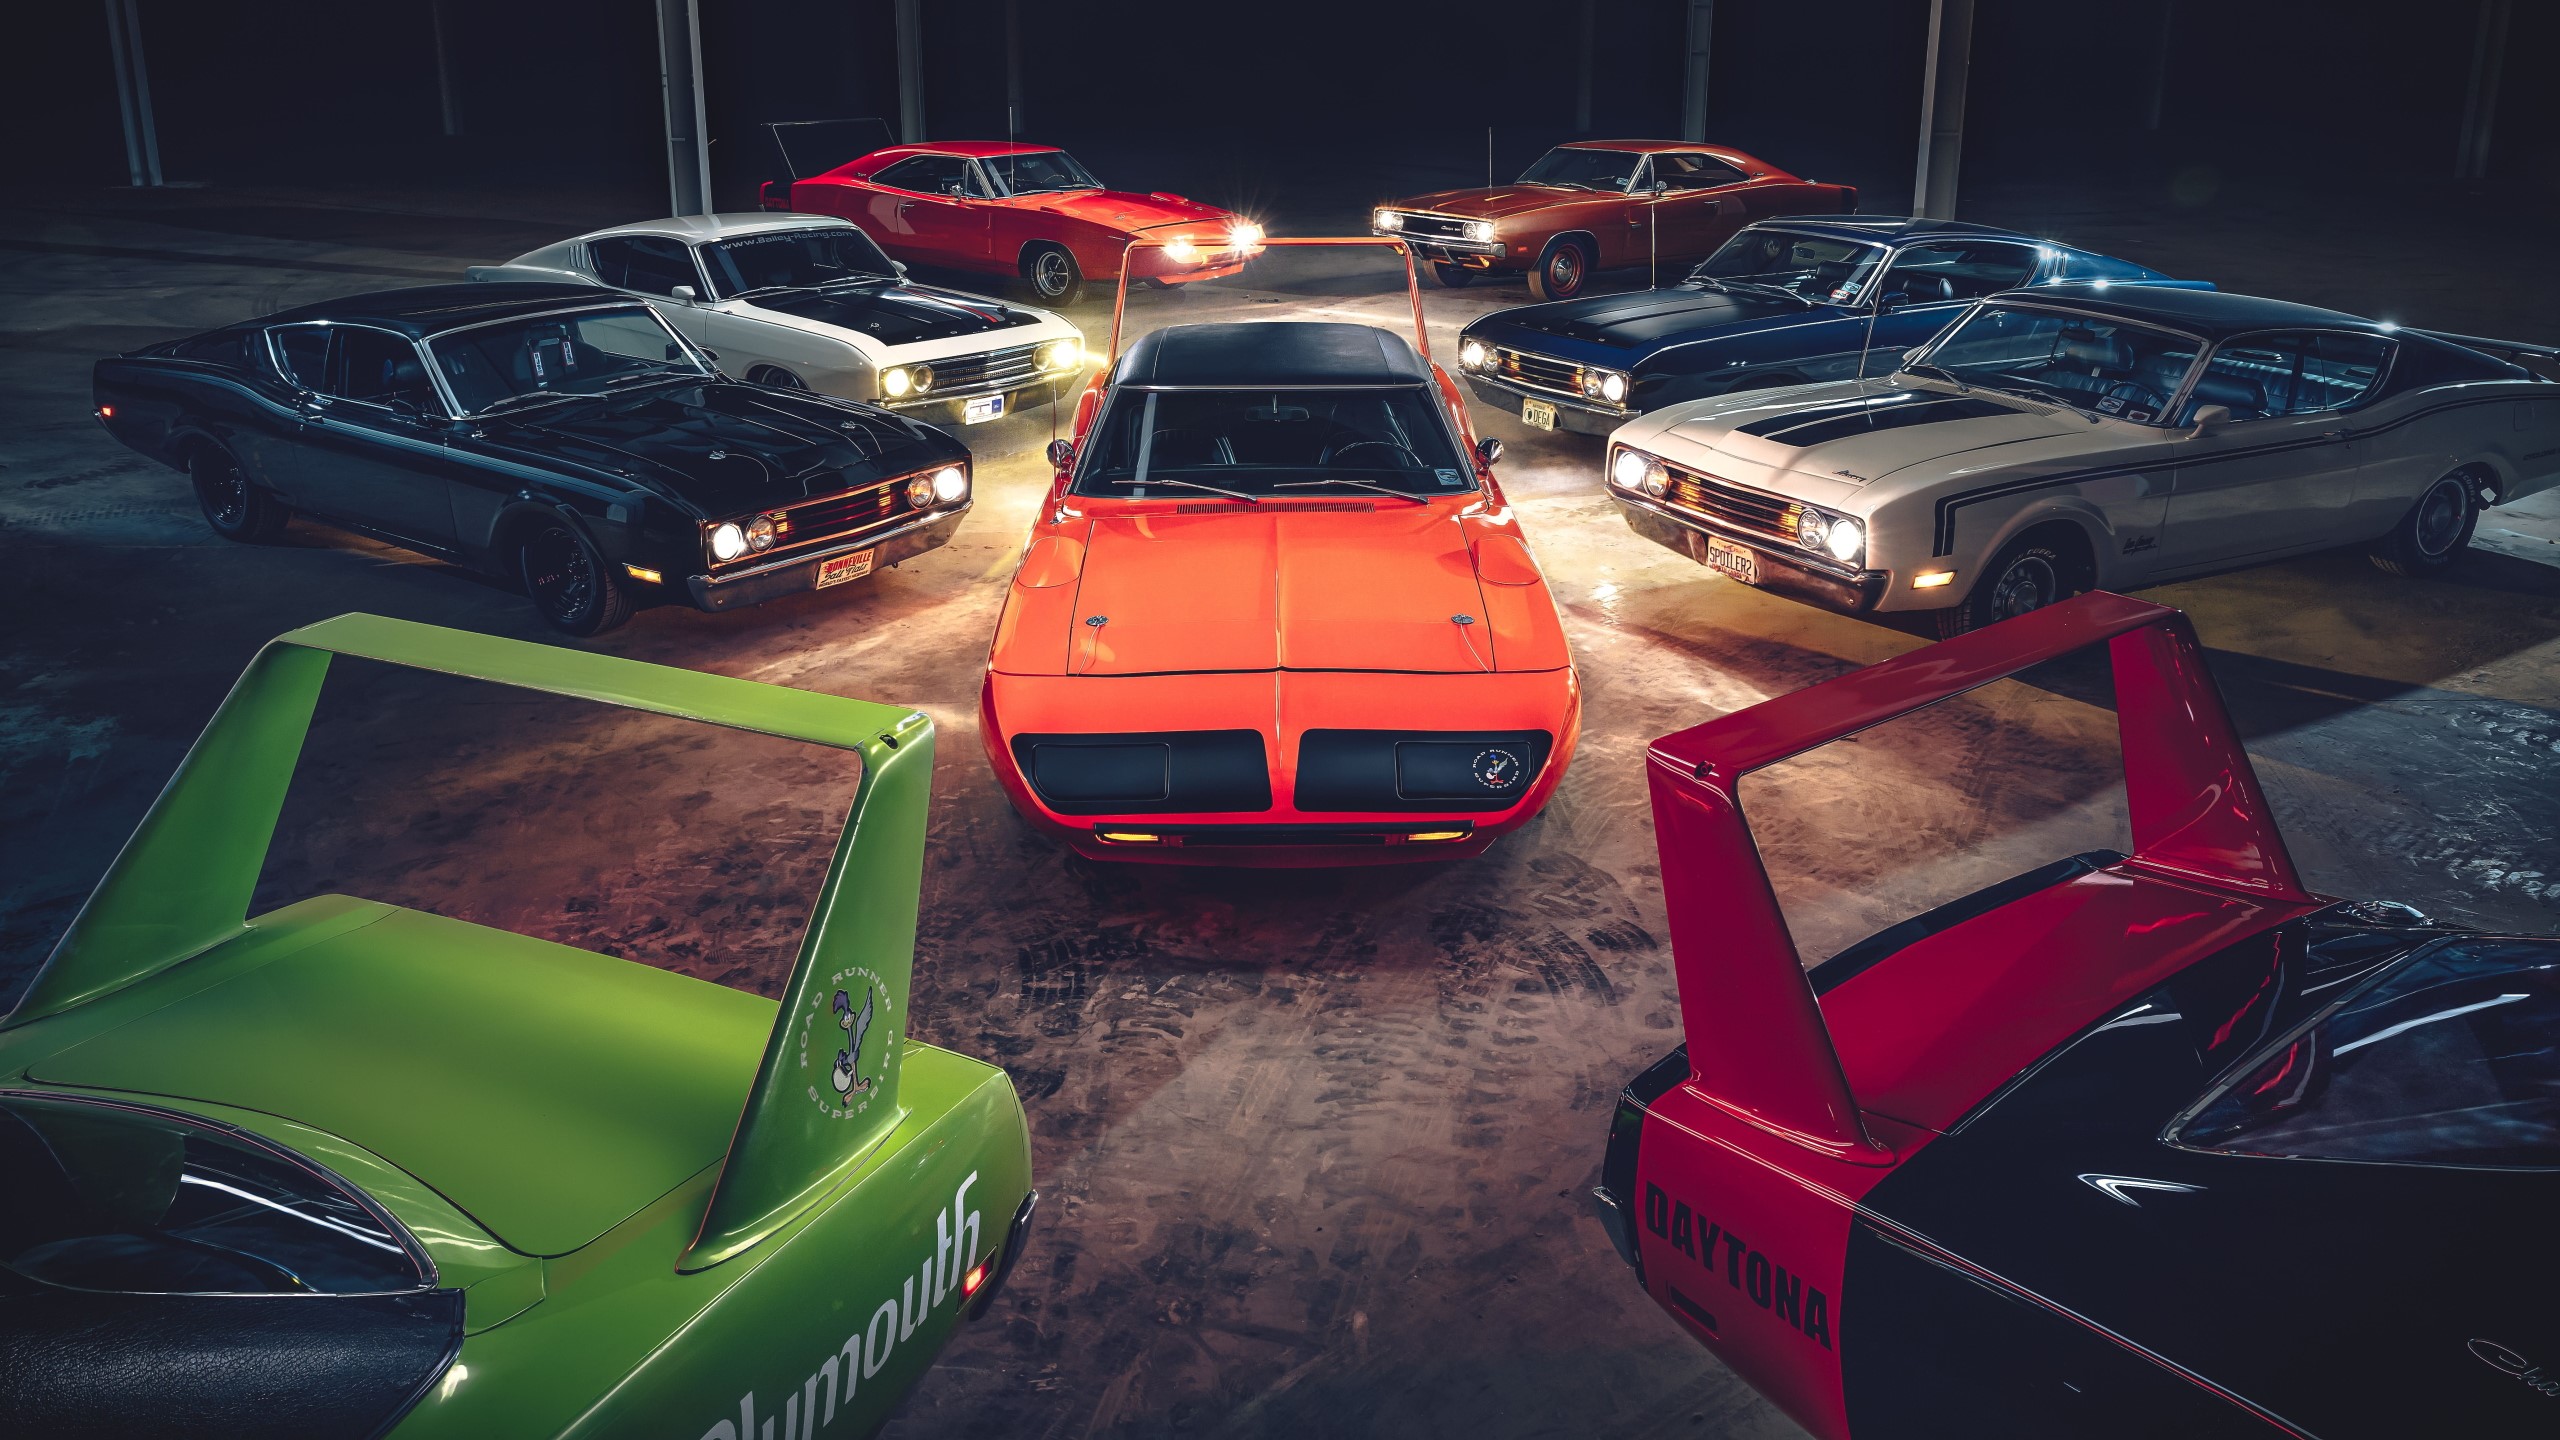 group of cars 1080P, 2k, 4k HD wallpaper, background free download